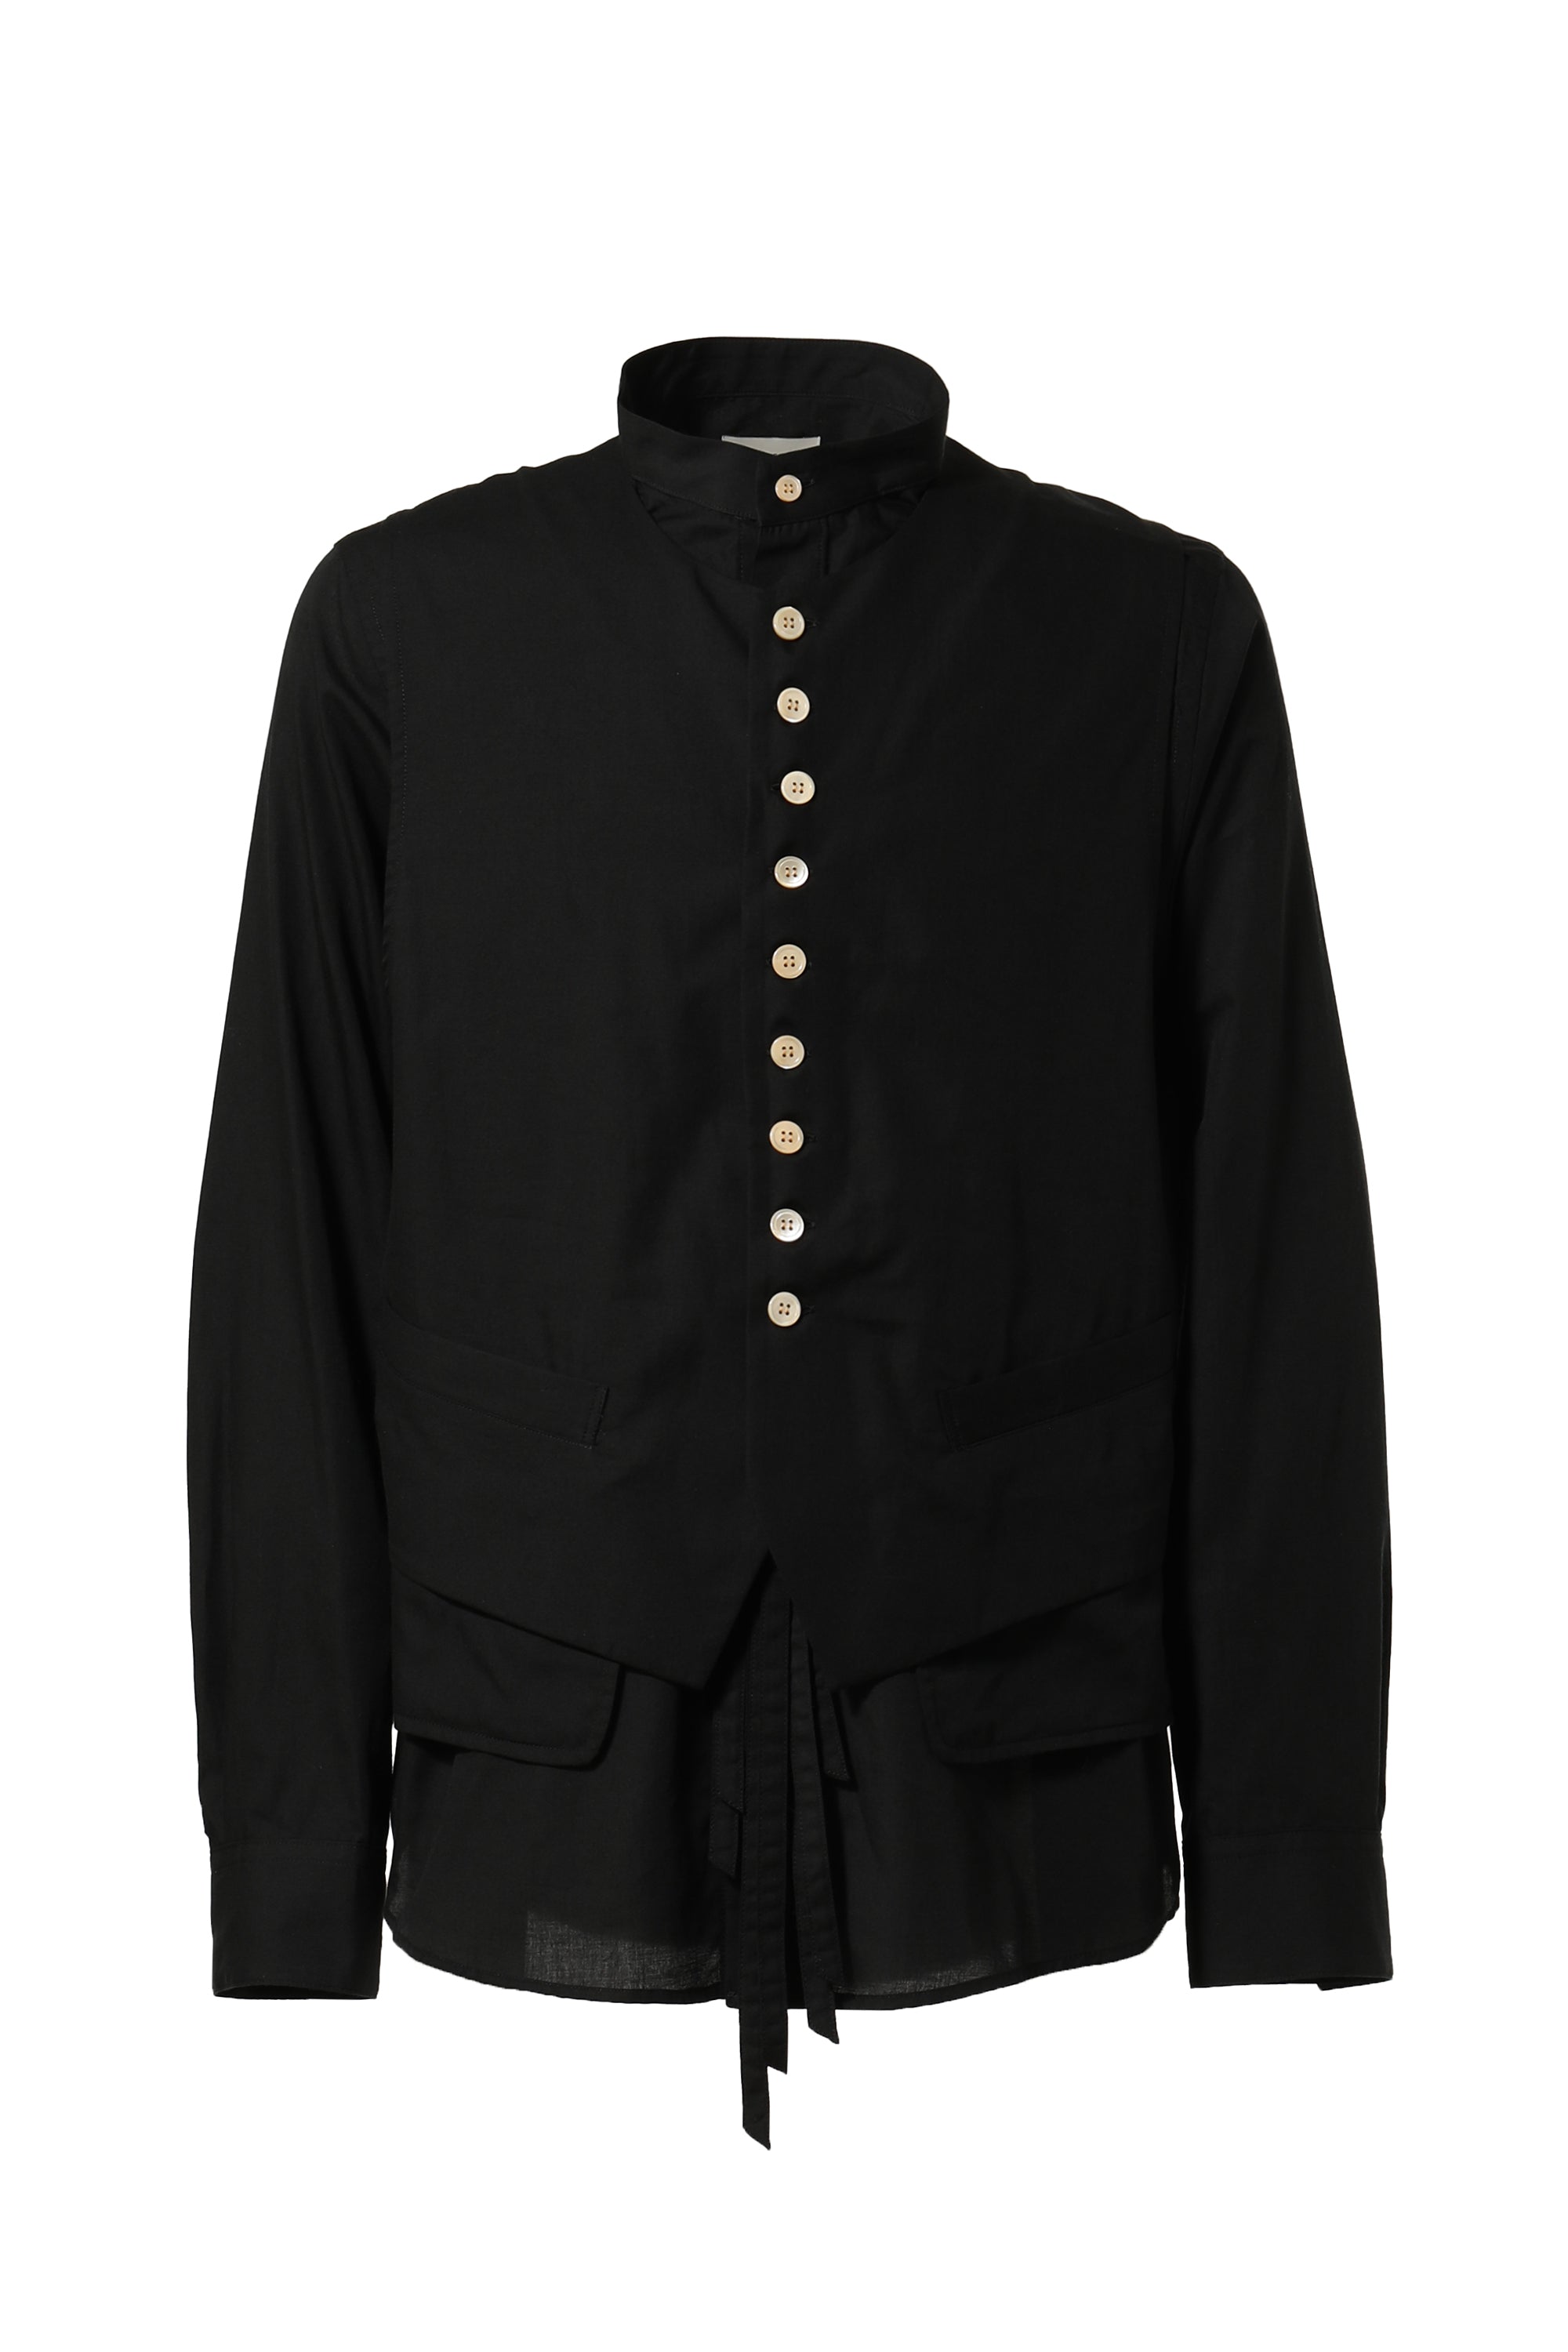 BED J.W. FORD FW23 LAYERED VEST SHIRTS OUTSIDE / BLK -NUBIAN